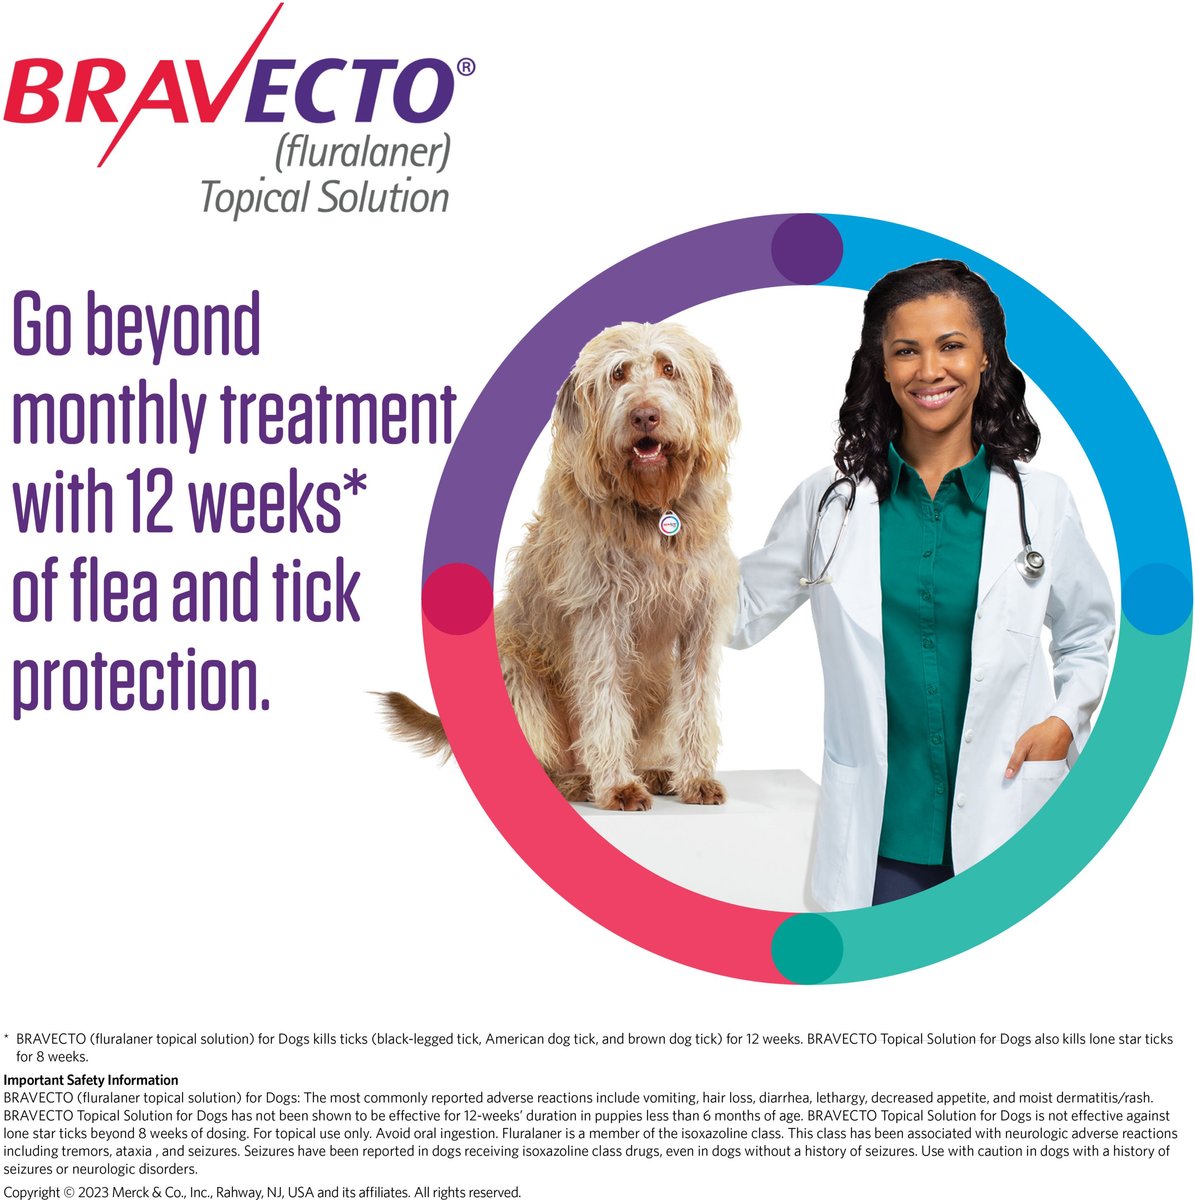 Bravecto Topical Solution for Dogs 4.4-9.9 lbs (2-4.5 kg) - Yellow